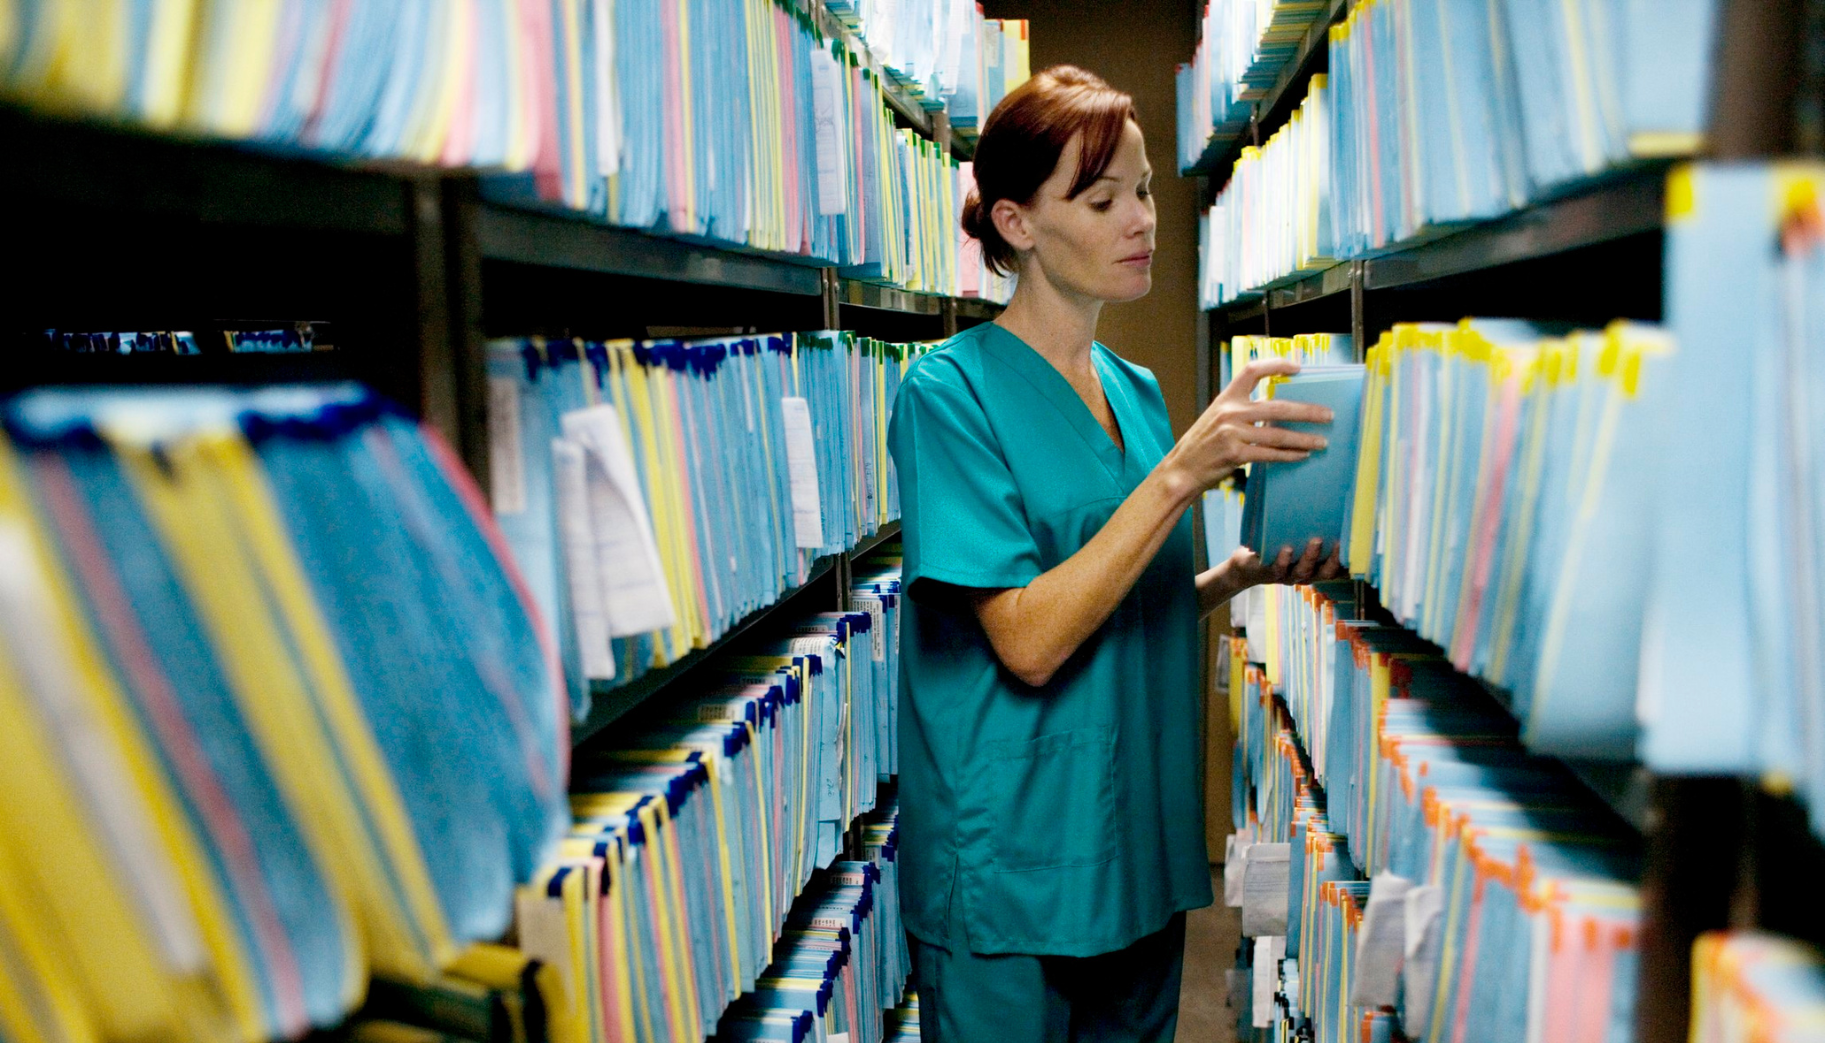 Hospital nurse looking through filed paper medical records.